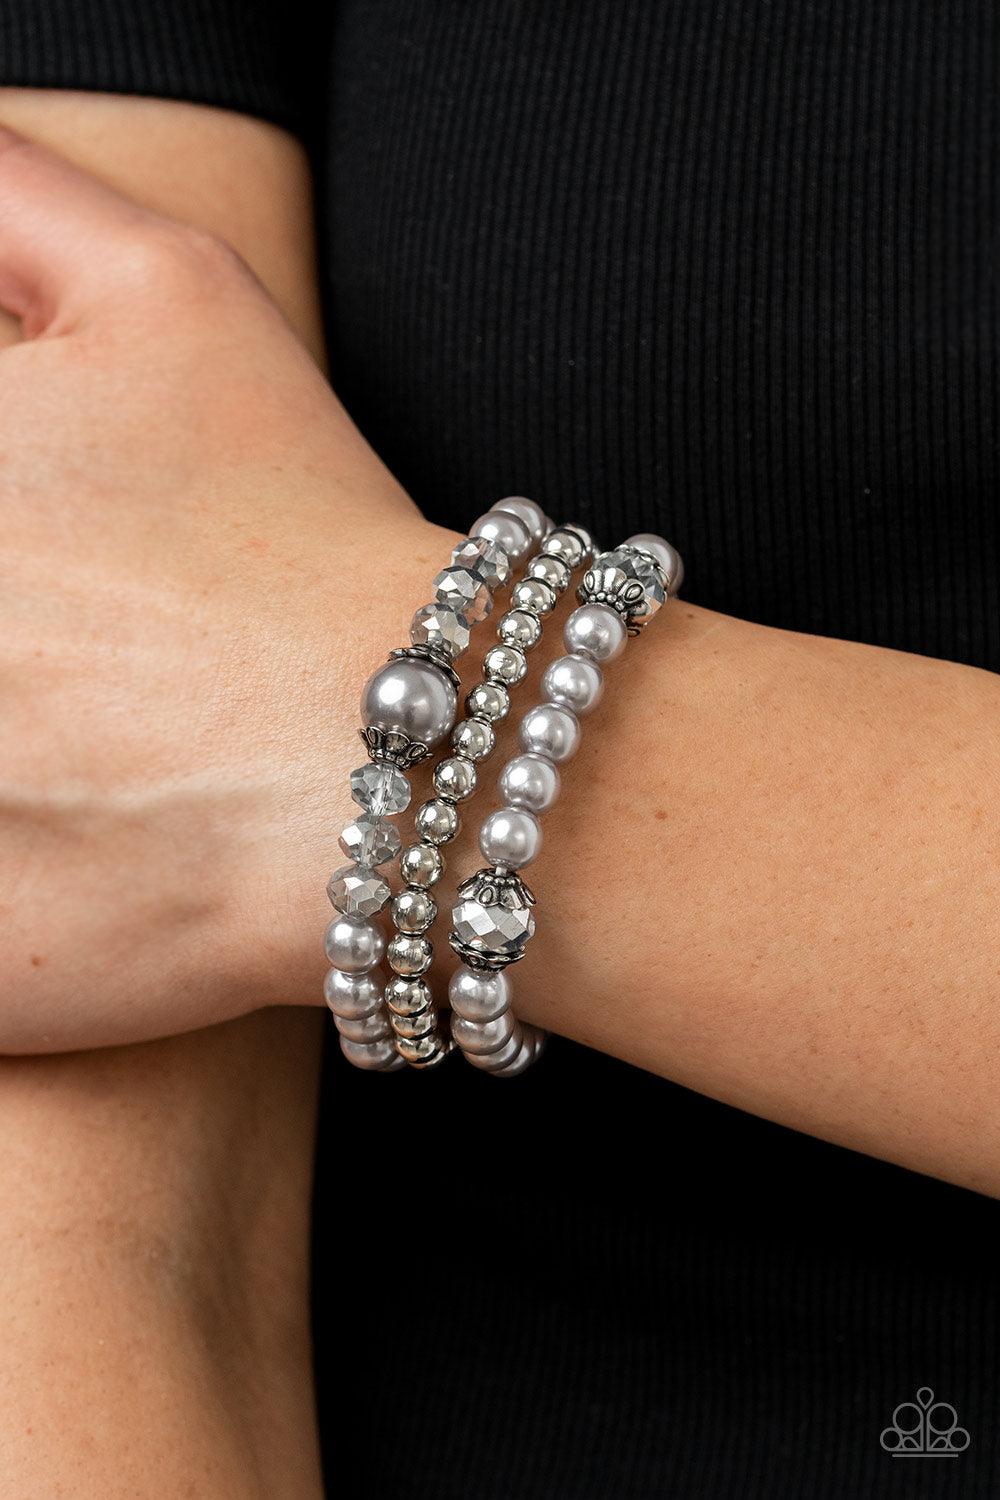 Paparazzi Accessories Positively Polished - Silver Stretchy silver pearl and silver beaded bracelets are adorned with ornate silver accents and glassy hematite flecked crystal-like beads, creating polished layers around the wrist. Sold as one set of three